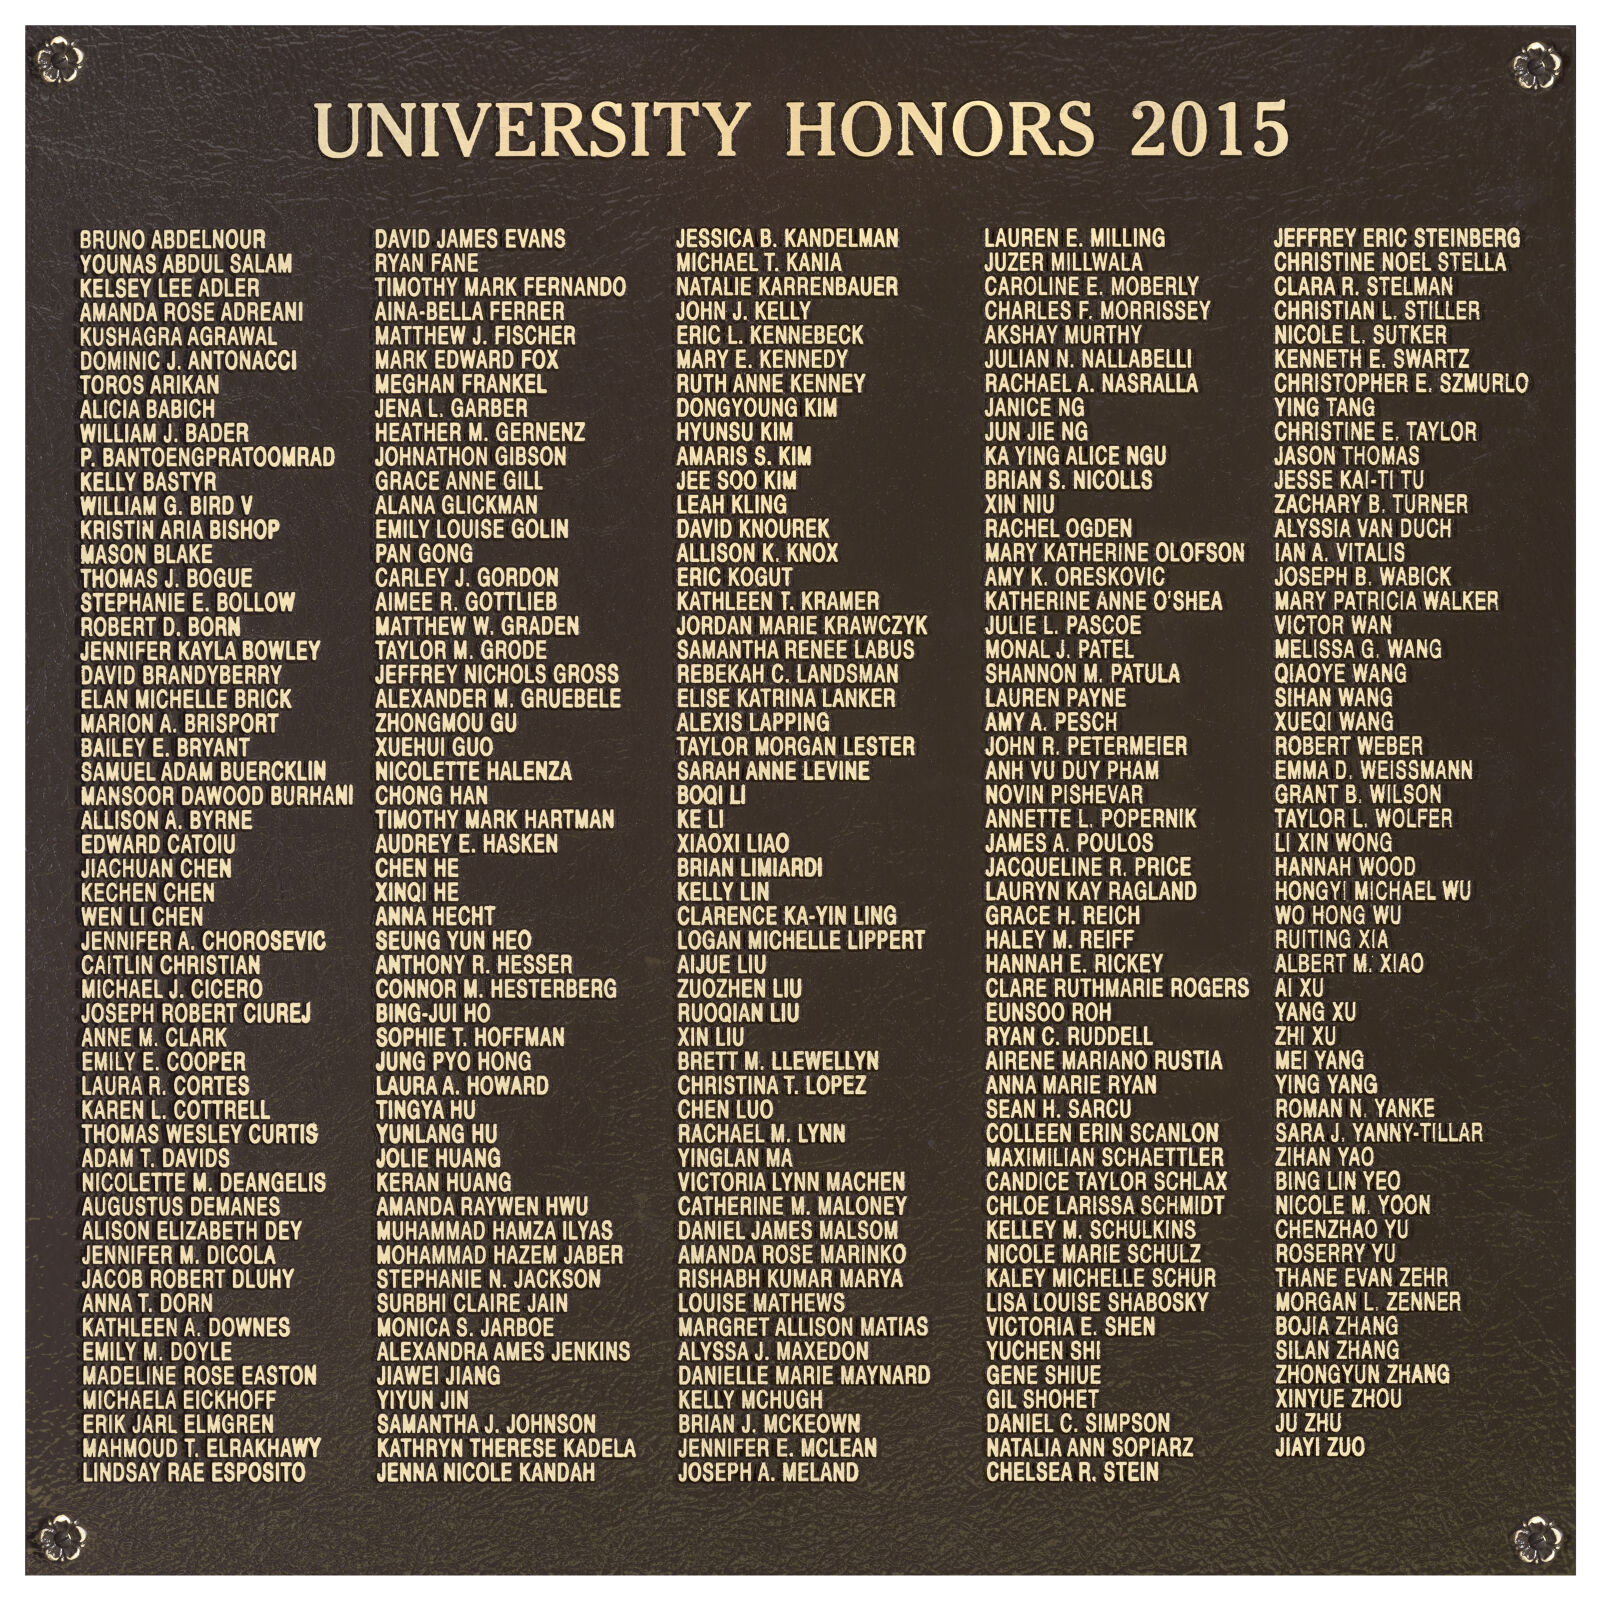 2015 University Honors  Digital Collections at the University of Illinois  at Urbana-Champaign Library